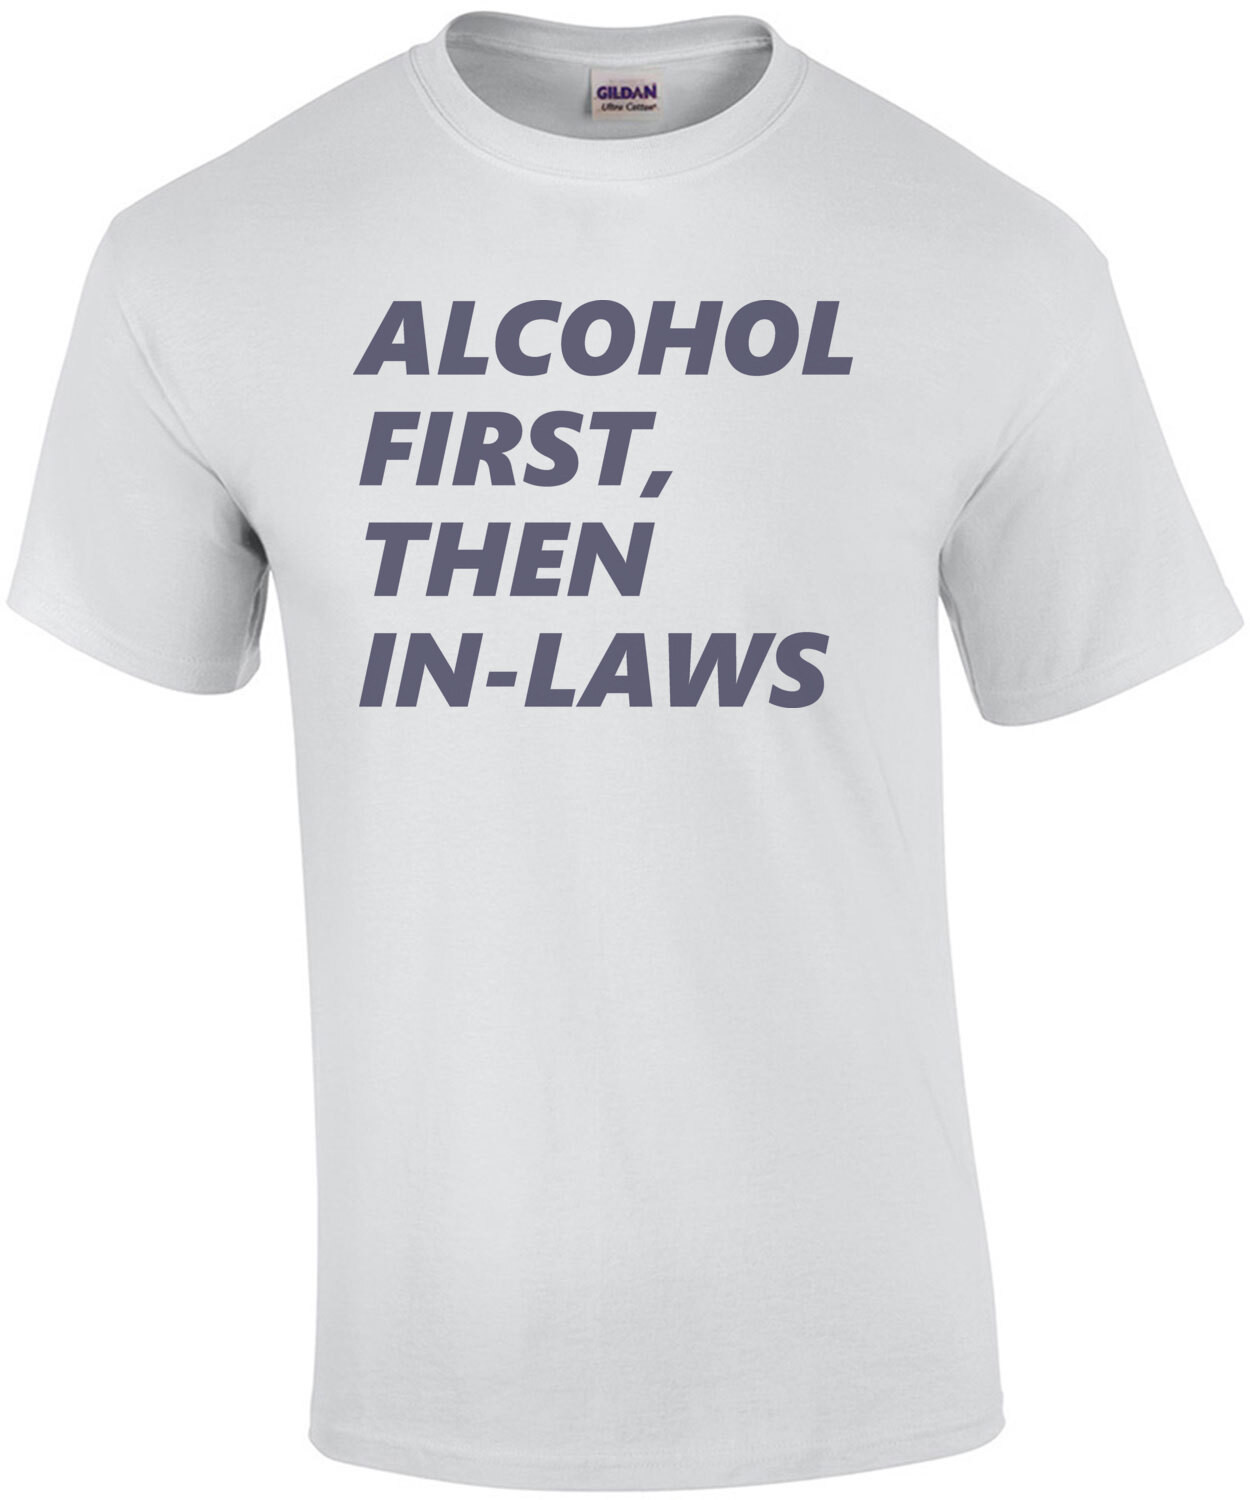 Alcohol First, Then In-Laws - funny drinking t-shirt